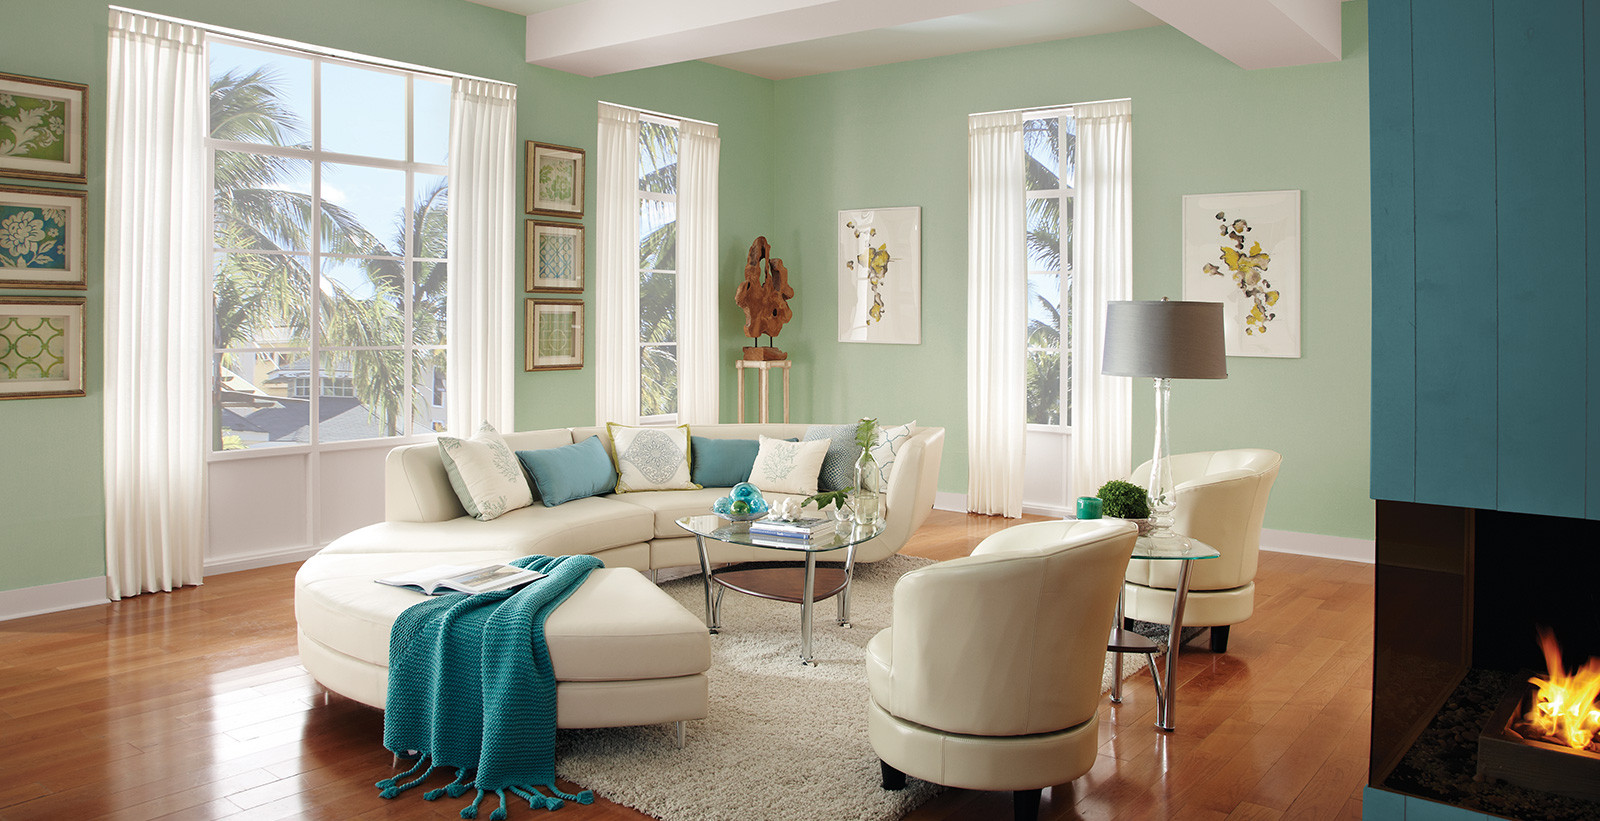 Best Colors For Living Room
 Calming Living Room Ideas and Inspirational Paint Colors